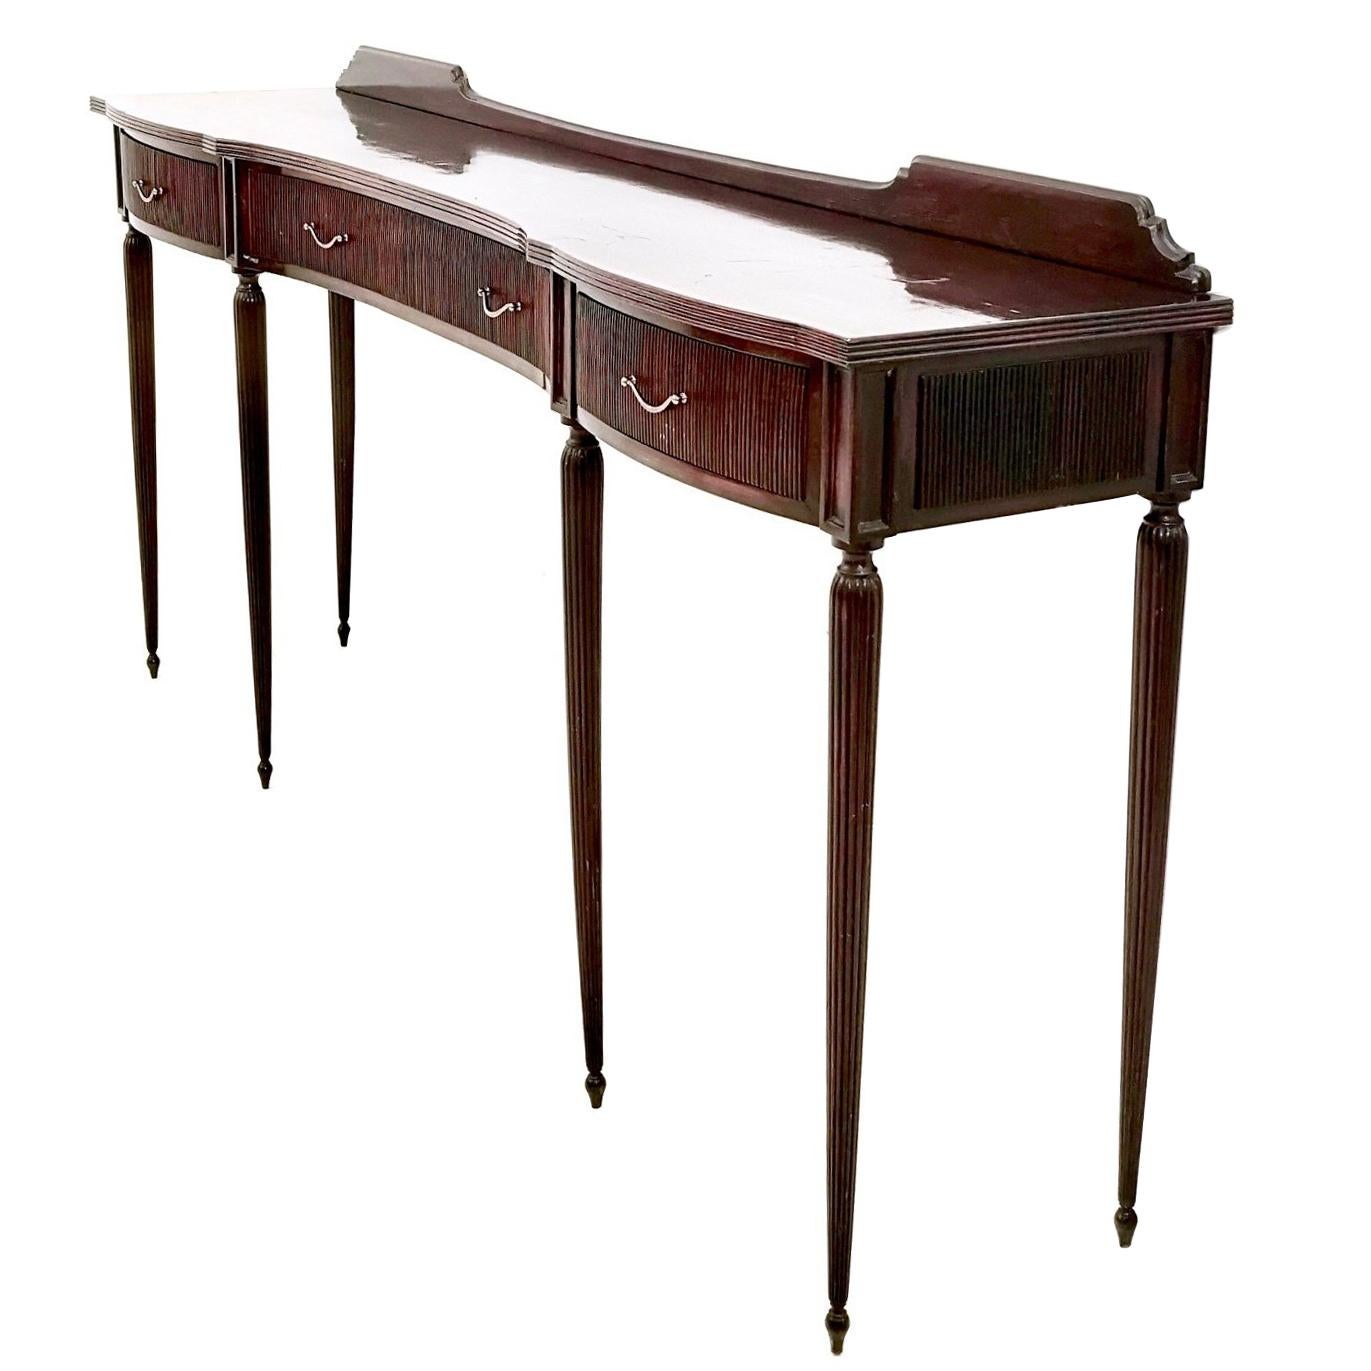 Made in Italy, 1950s.
It is made in walnut and features brass handles. 
This console may show slight traces of use since it is vintage, but it can be considered as in very good original condition and ready to become a piece in a home.
Its top may